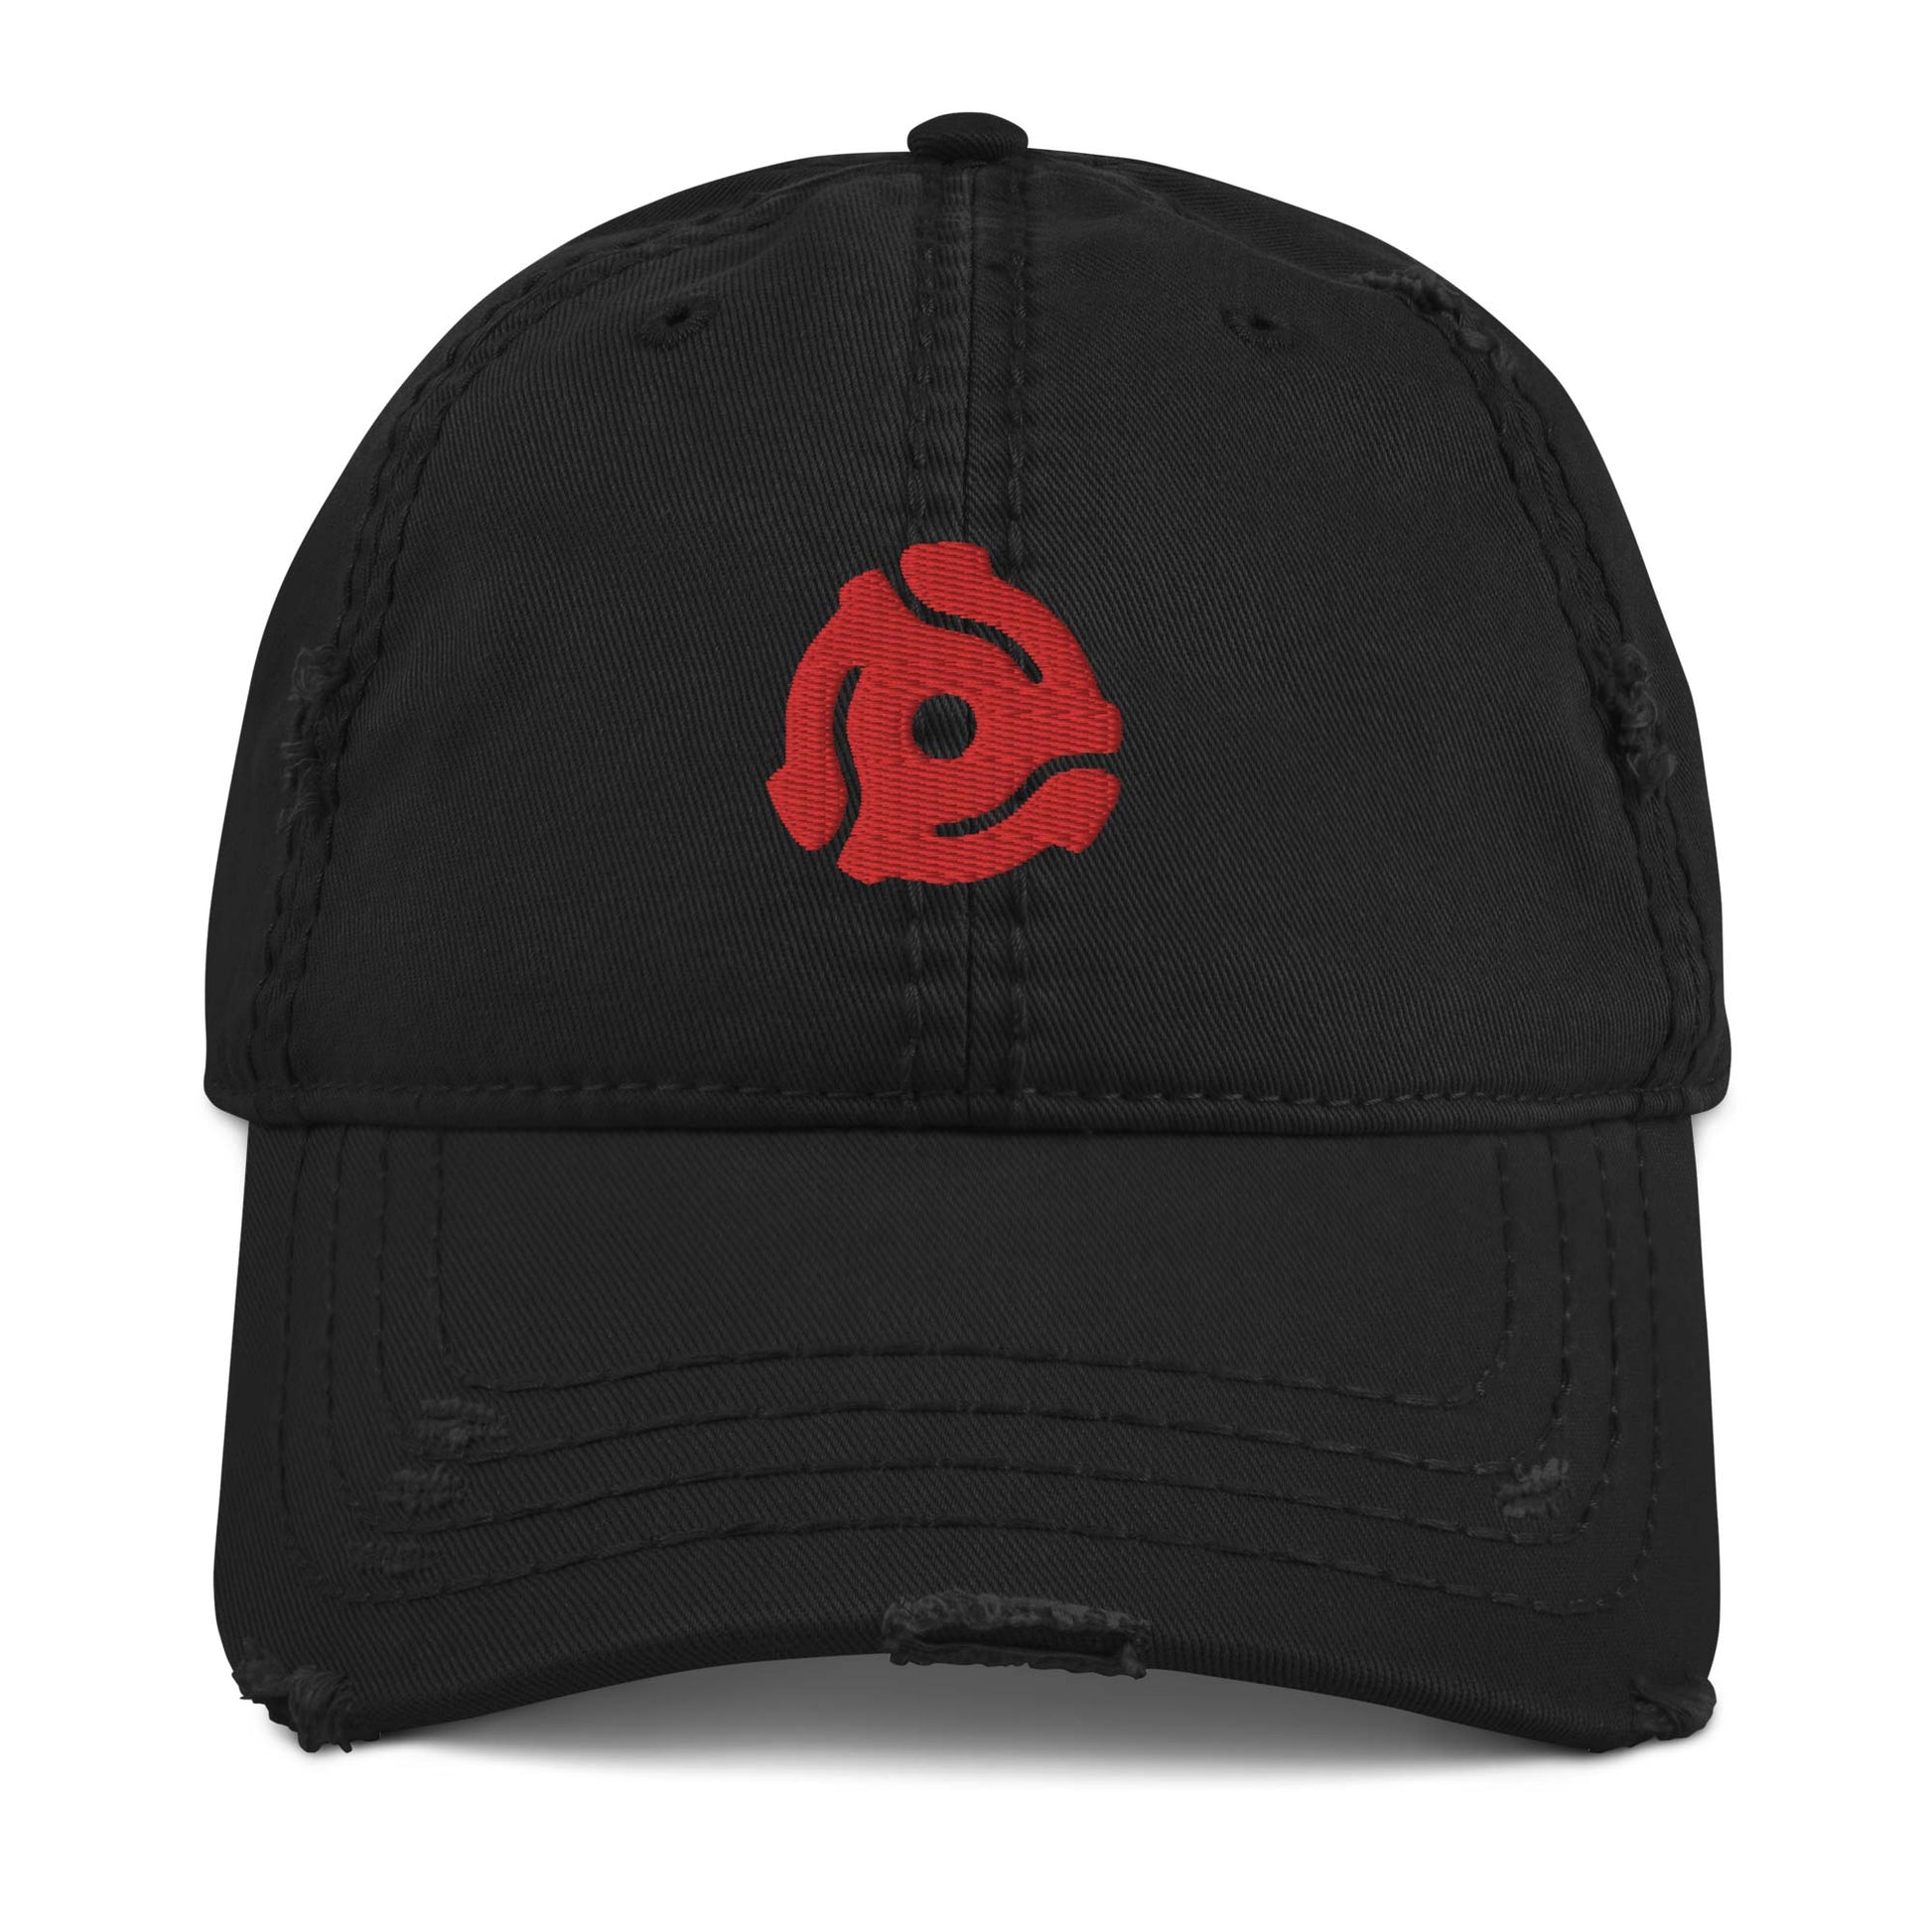 45 RPM Adapter Embroidered hat